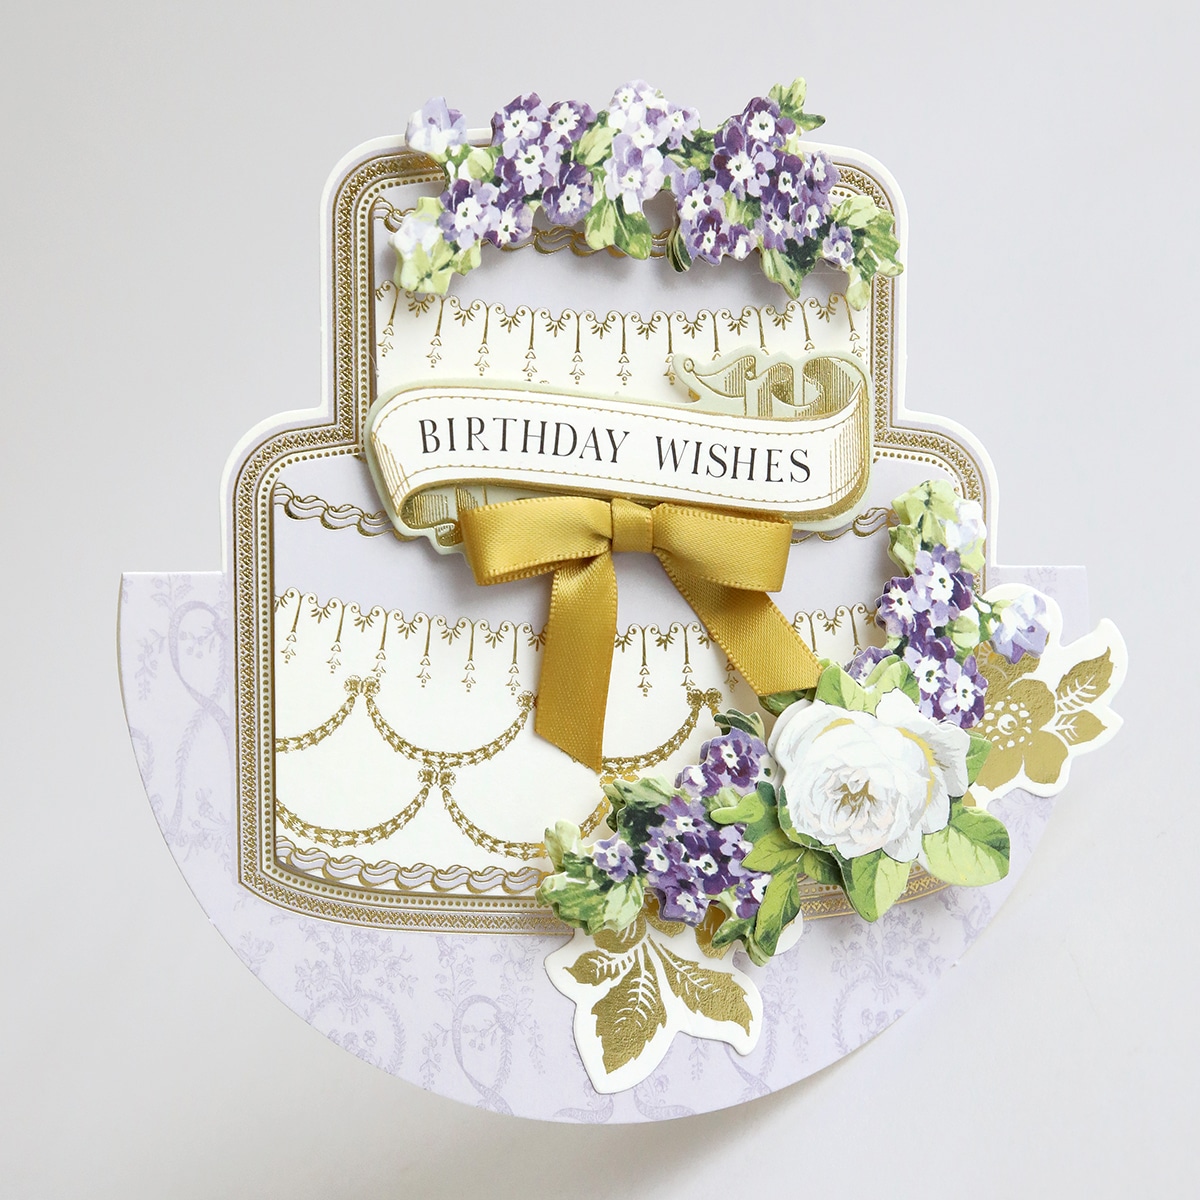 A card with a cake and flowers on it.